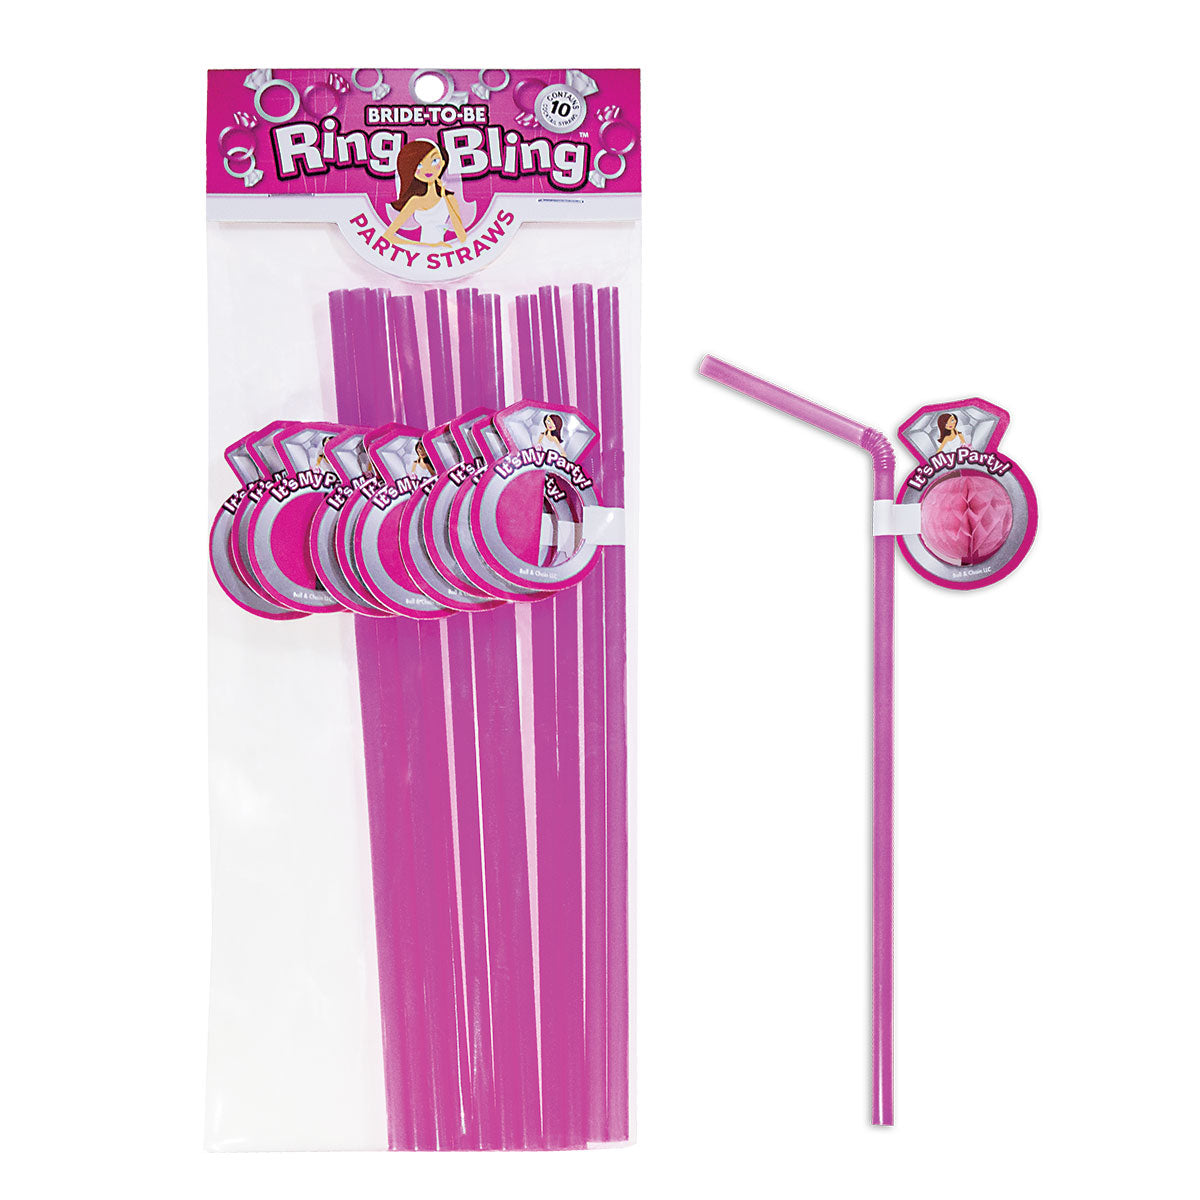 Bride-to-Be Ring Bling Party Straws